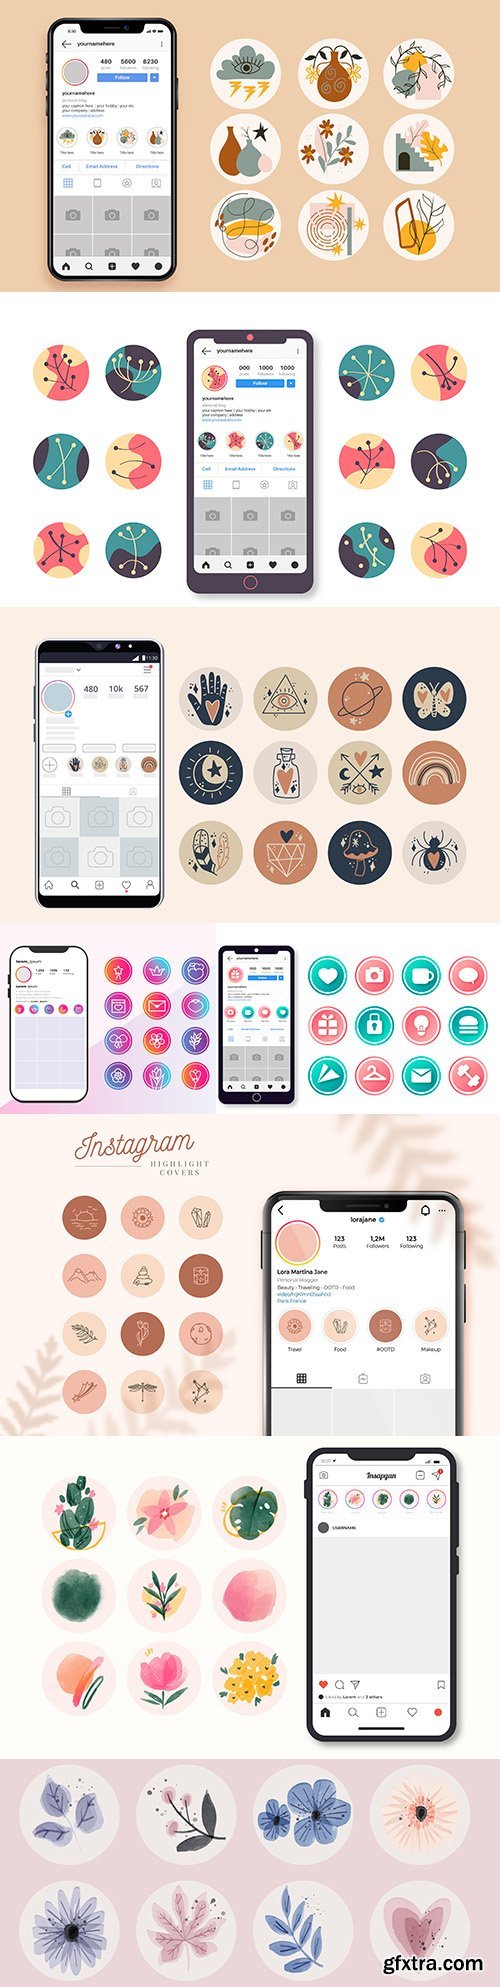 Instagram icons for application design abstract drawn